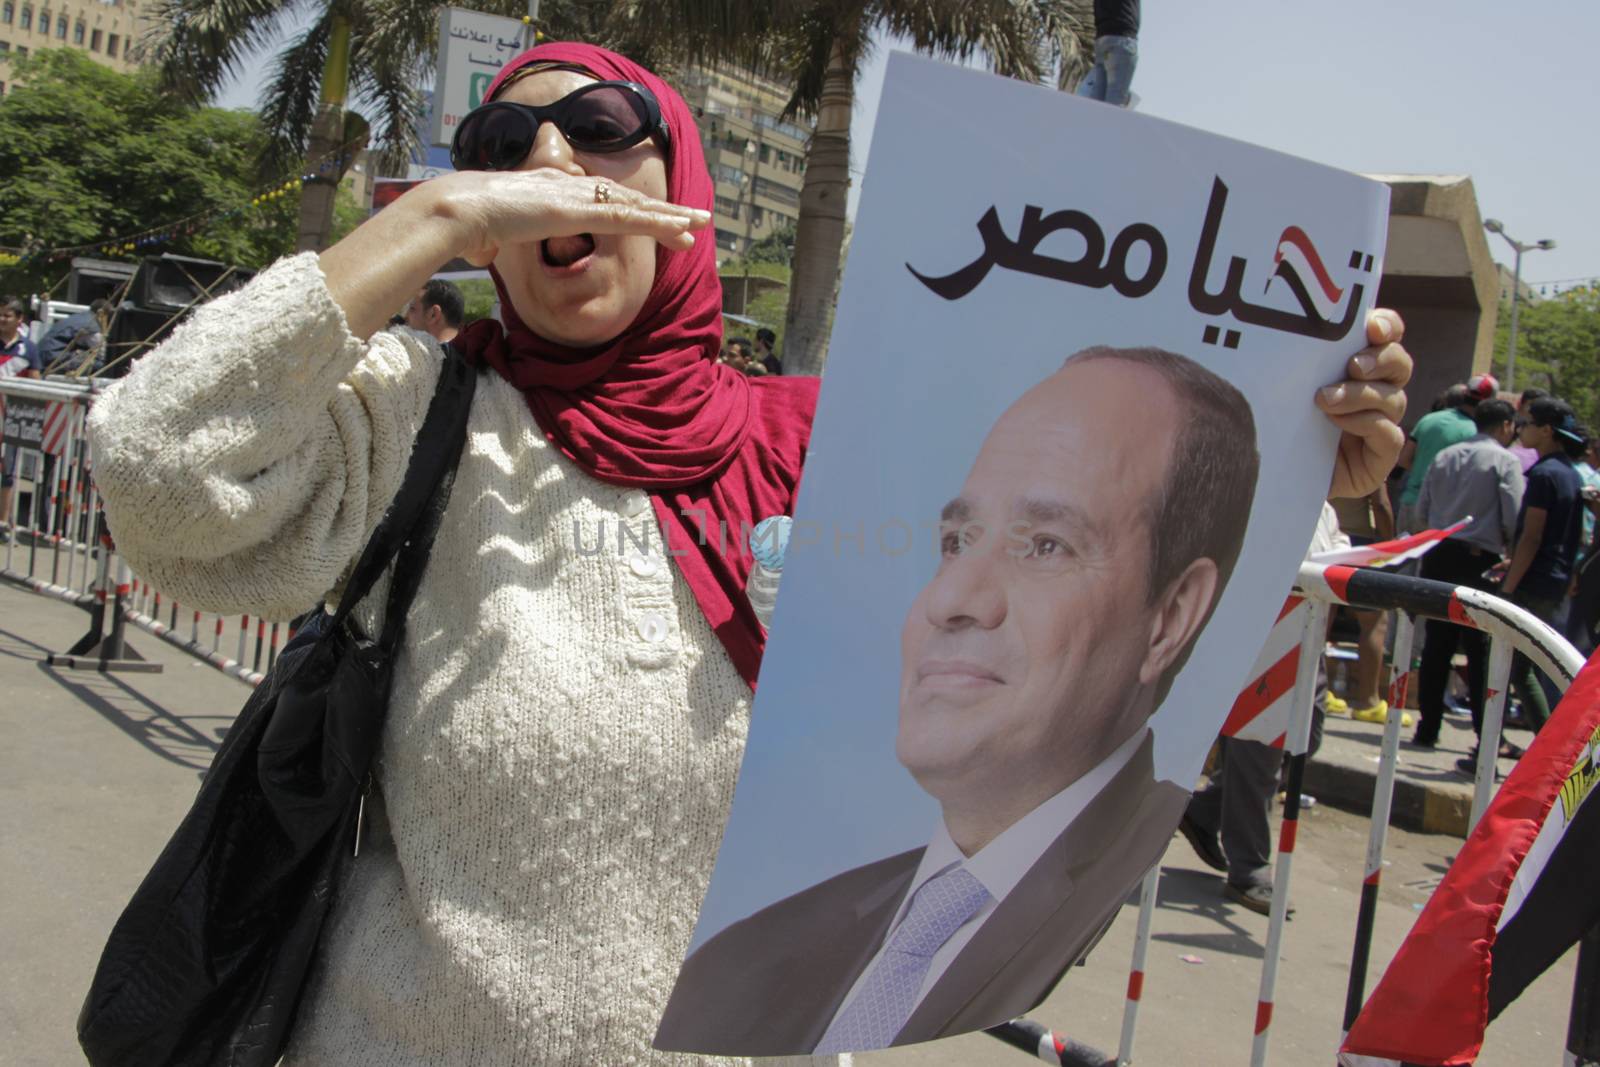 EGYPT, Giza: A woman holds a portrait of Egyptian president Abdel-Fattah el-Sissi reading Long live Egypt and gather in Mostafa Mahmoud Square in Giza, near Cairo on April 25, 2016 to commemorate the thirty-fourth anniversary of Sinai liberation. This same day, thousands of security personnel were deployed around Cairo ahead of mass planned protests over the return of two Red Sea islands to Saudi Arabia, a decision that has provoked some of the most open criticism of President Abdel-Fattah el-Sissi's leadership.